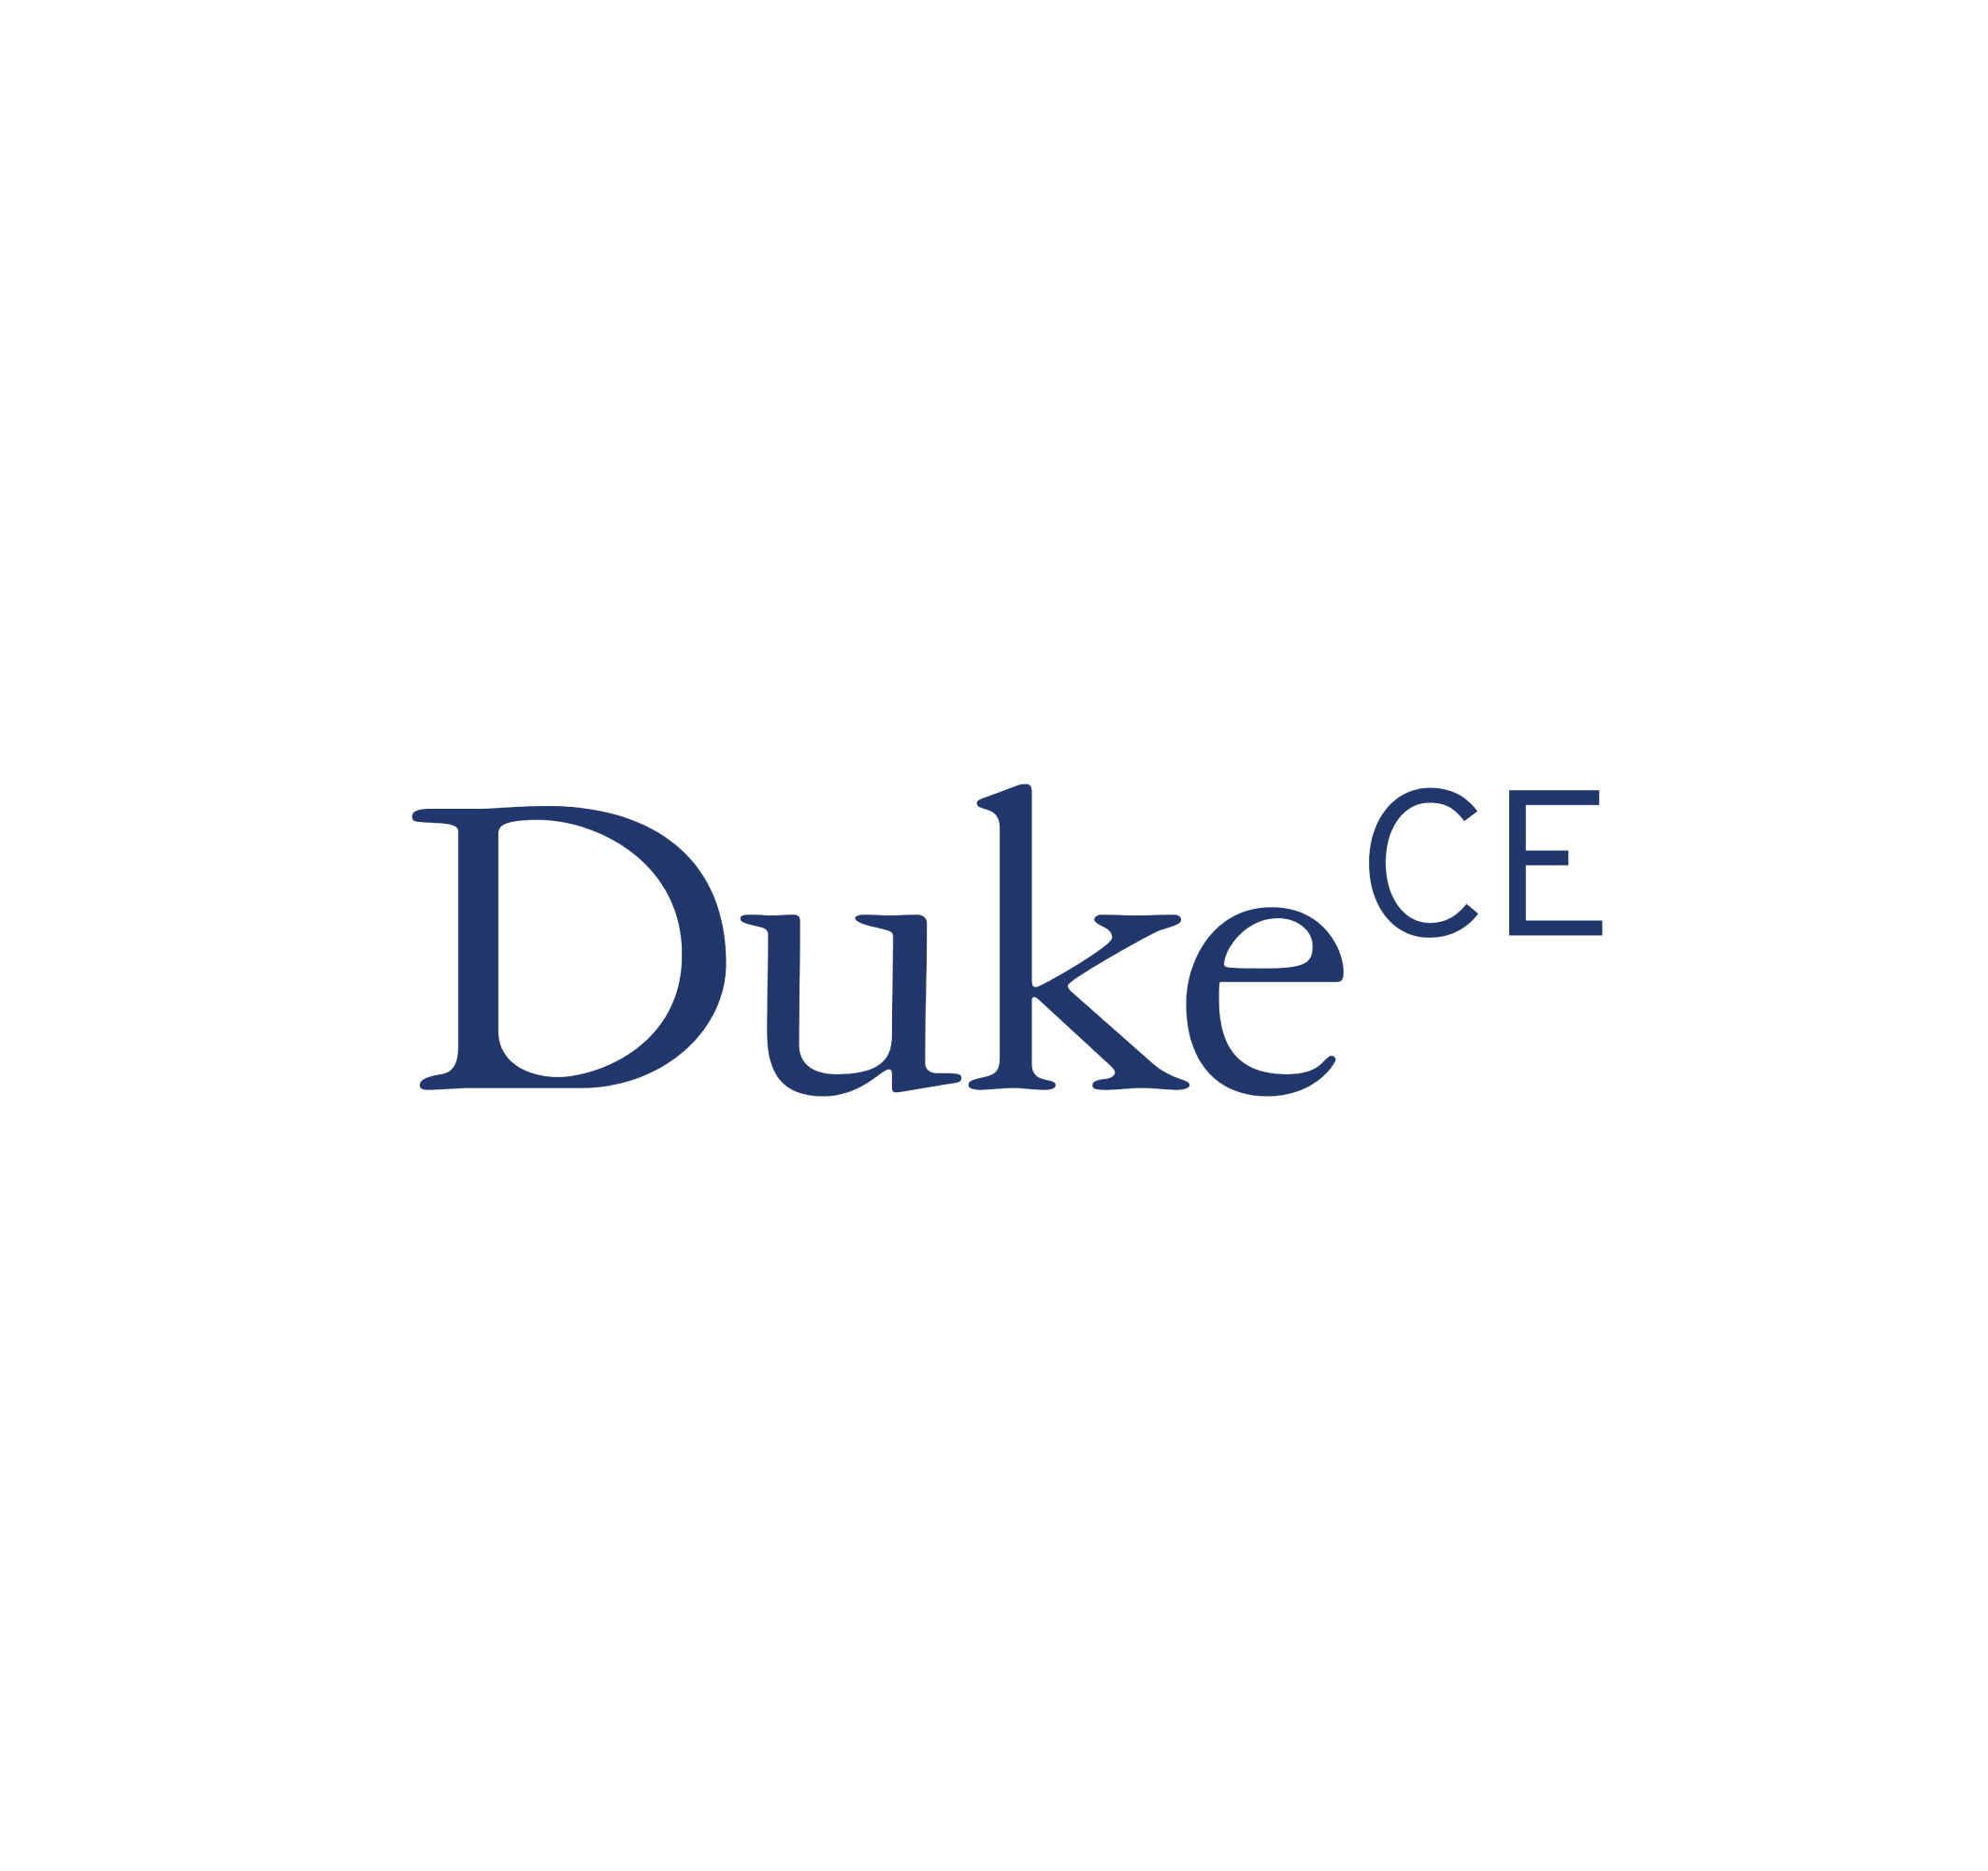 Online leadership program for nurses launched by Duke CE and OpusVi